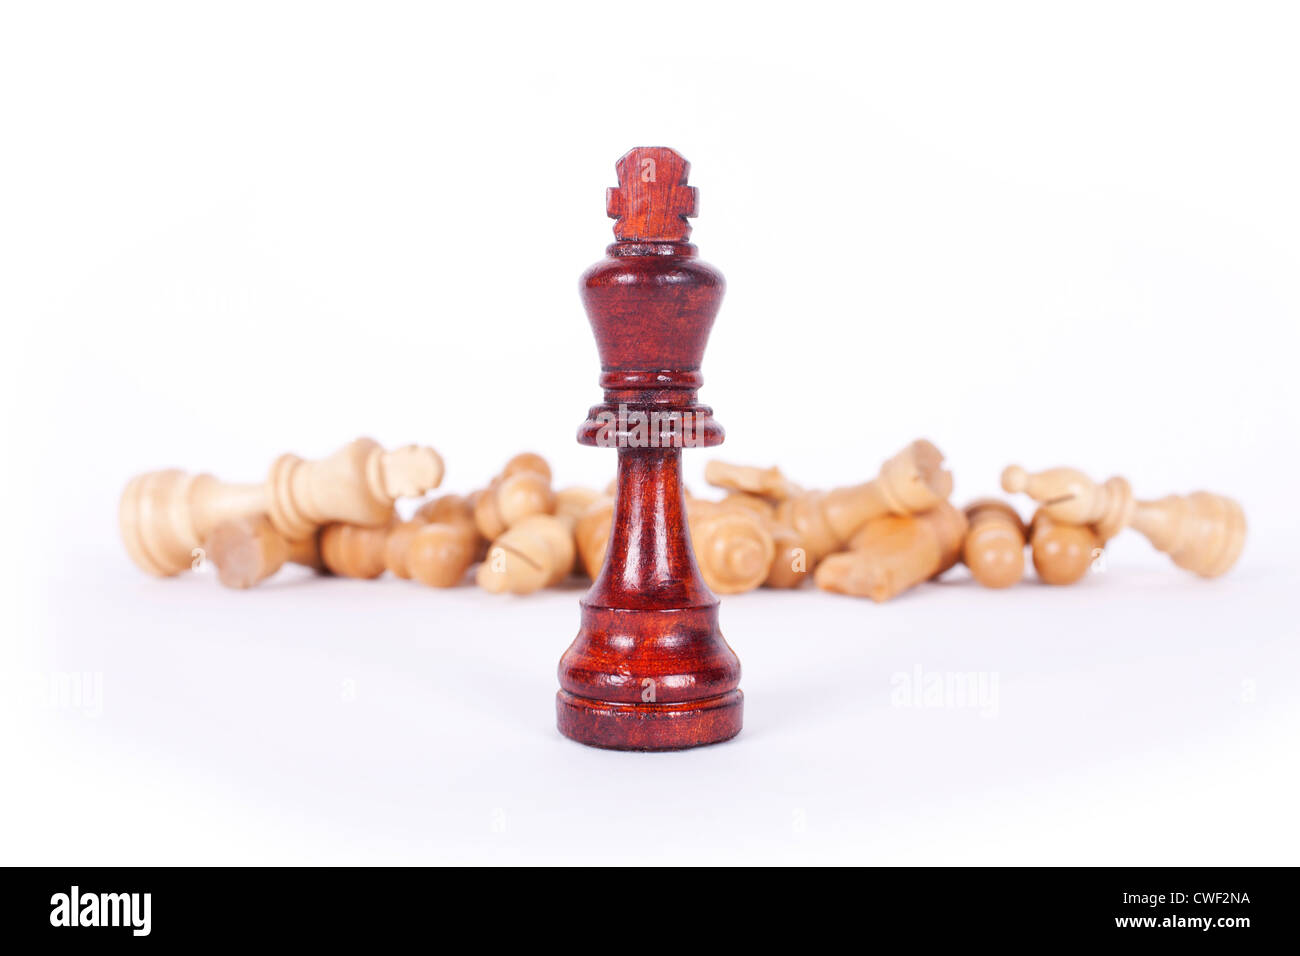 King chess piece stands triumphant in front of white army. Stock Photo